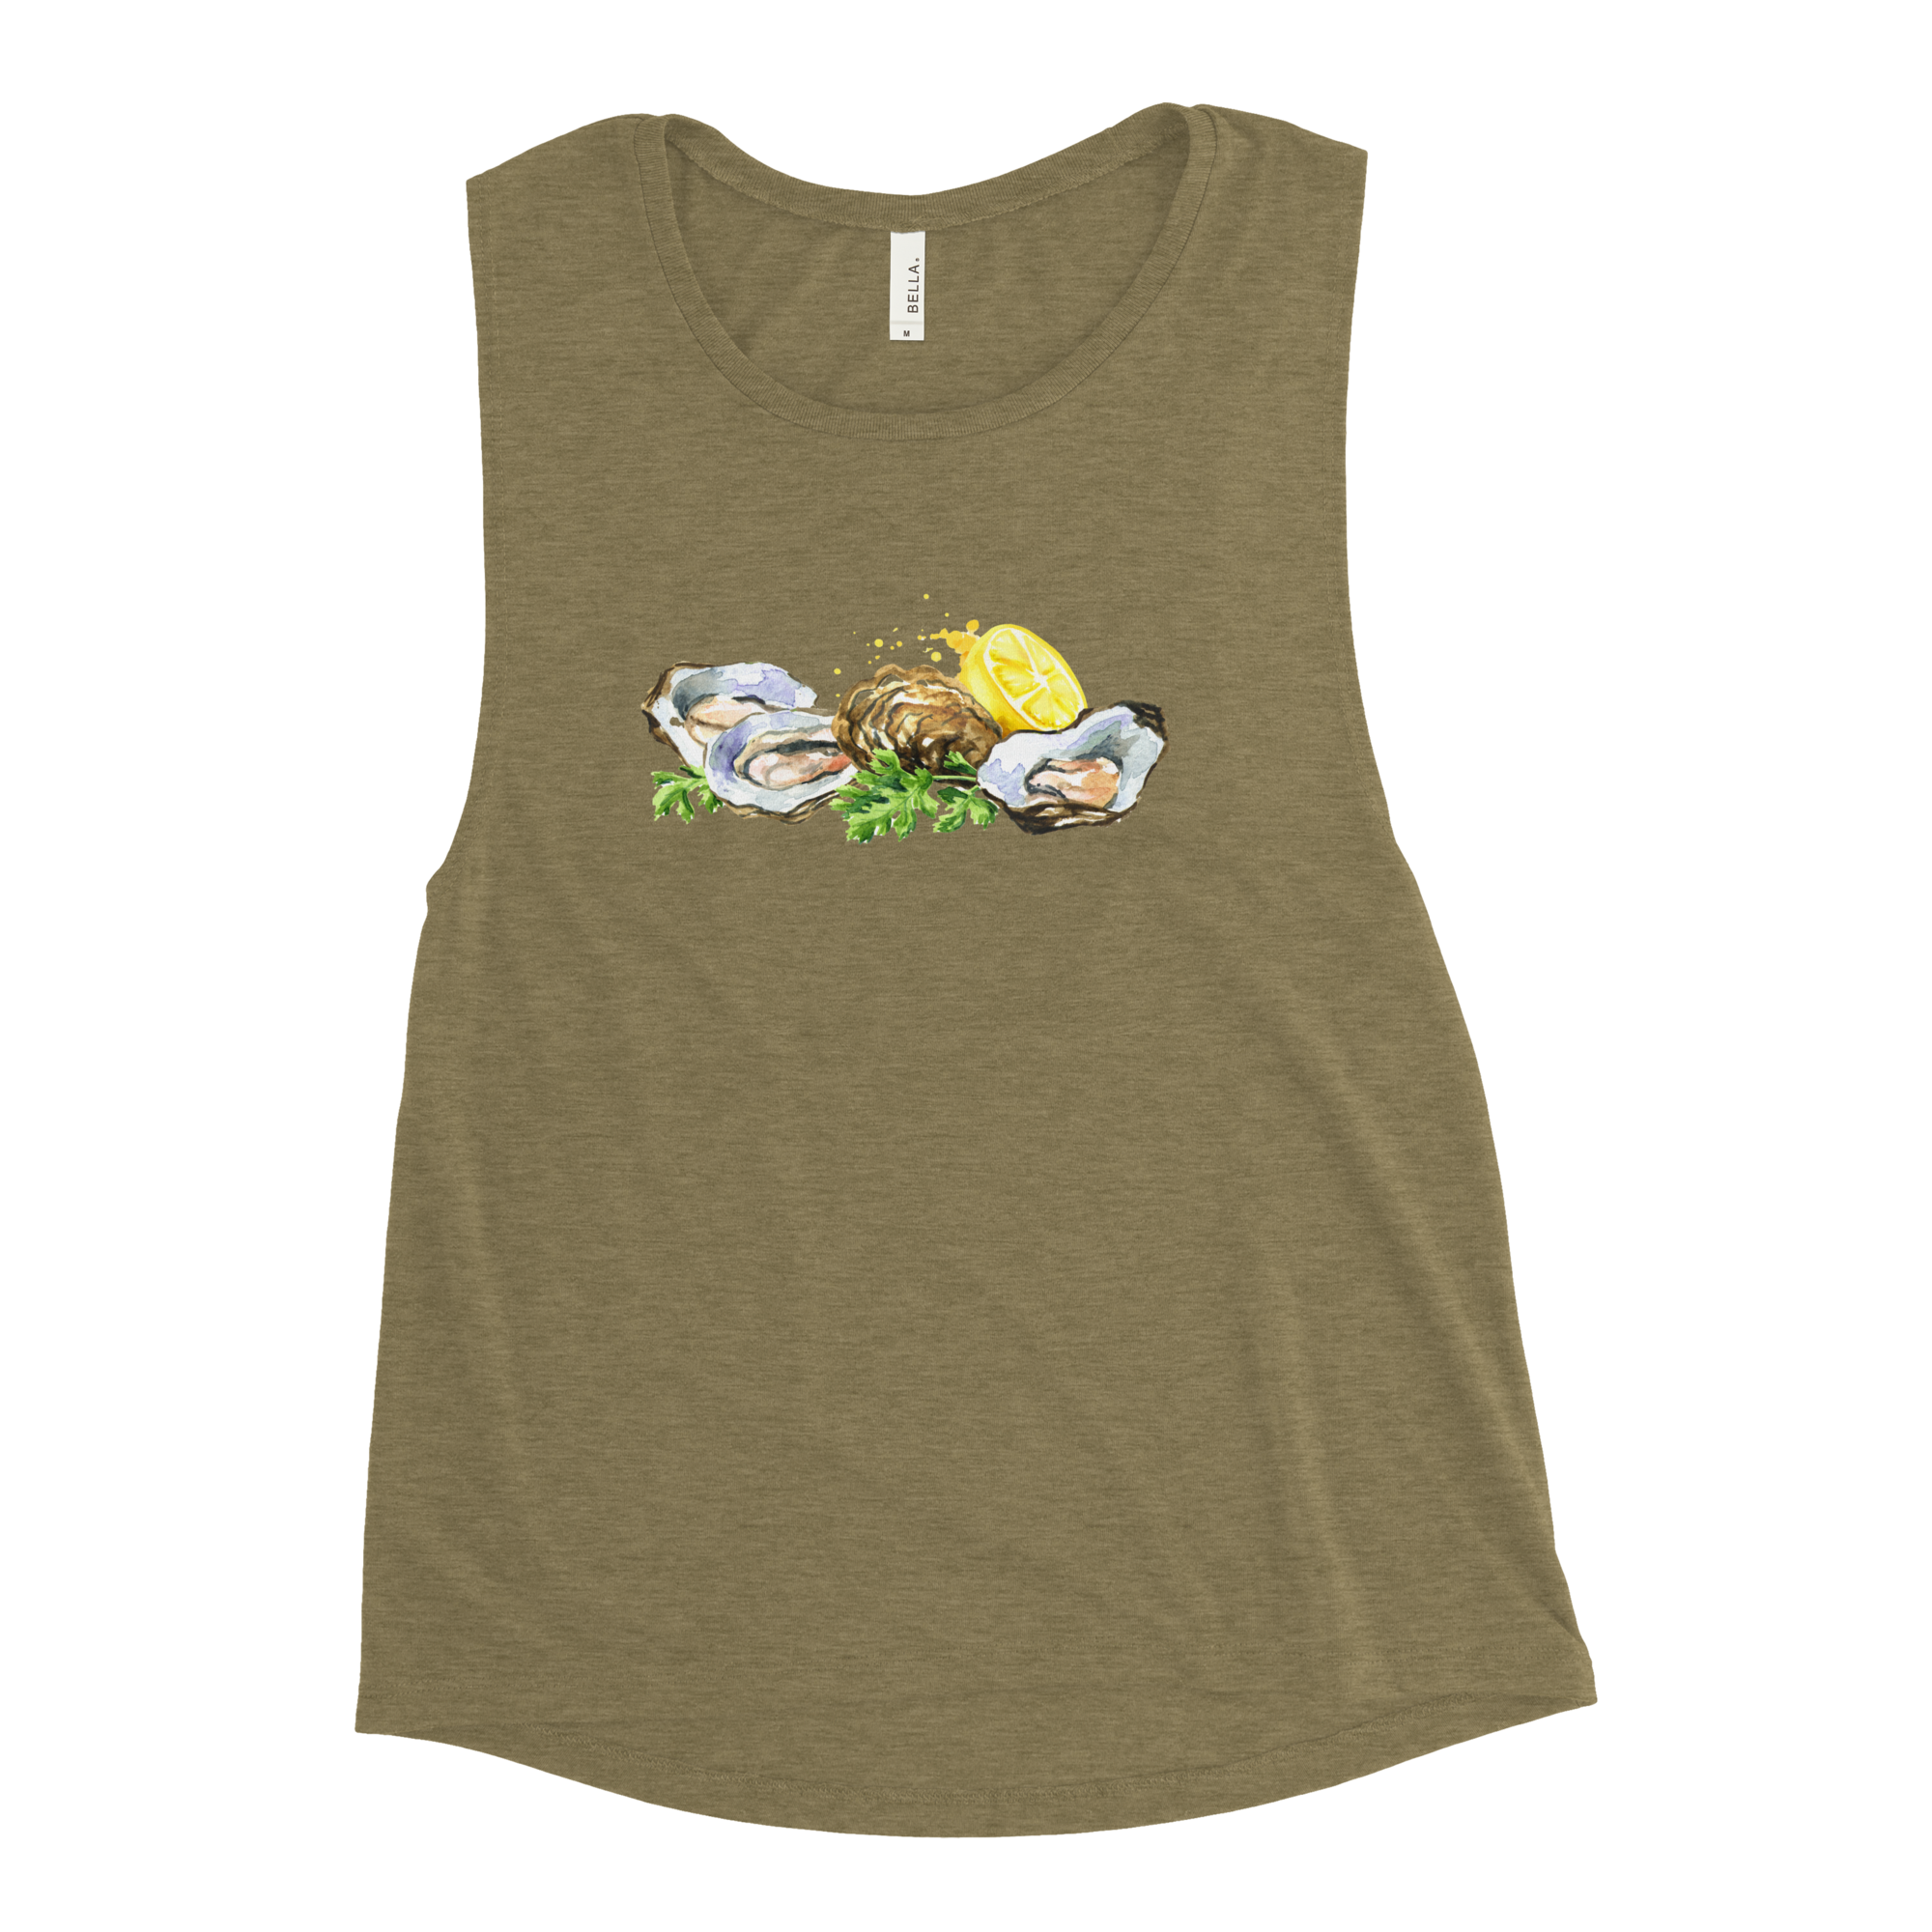 womens-muscle-tank-heather-olive-front-667b05c433953.png